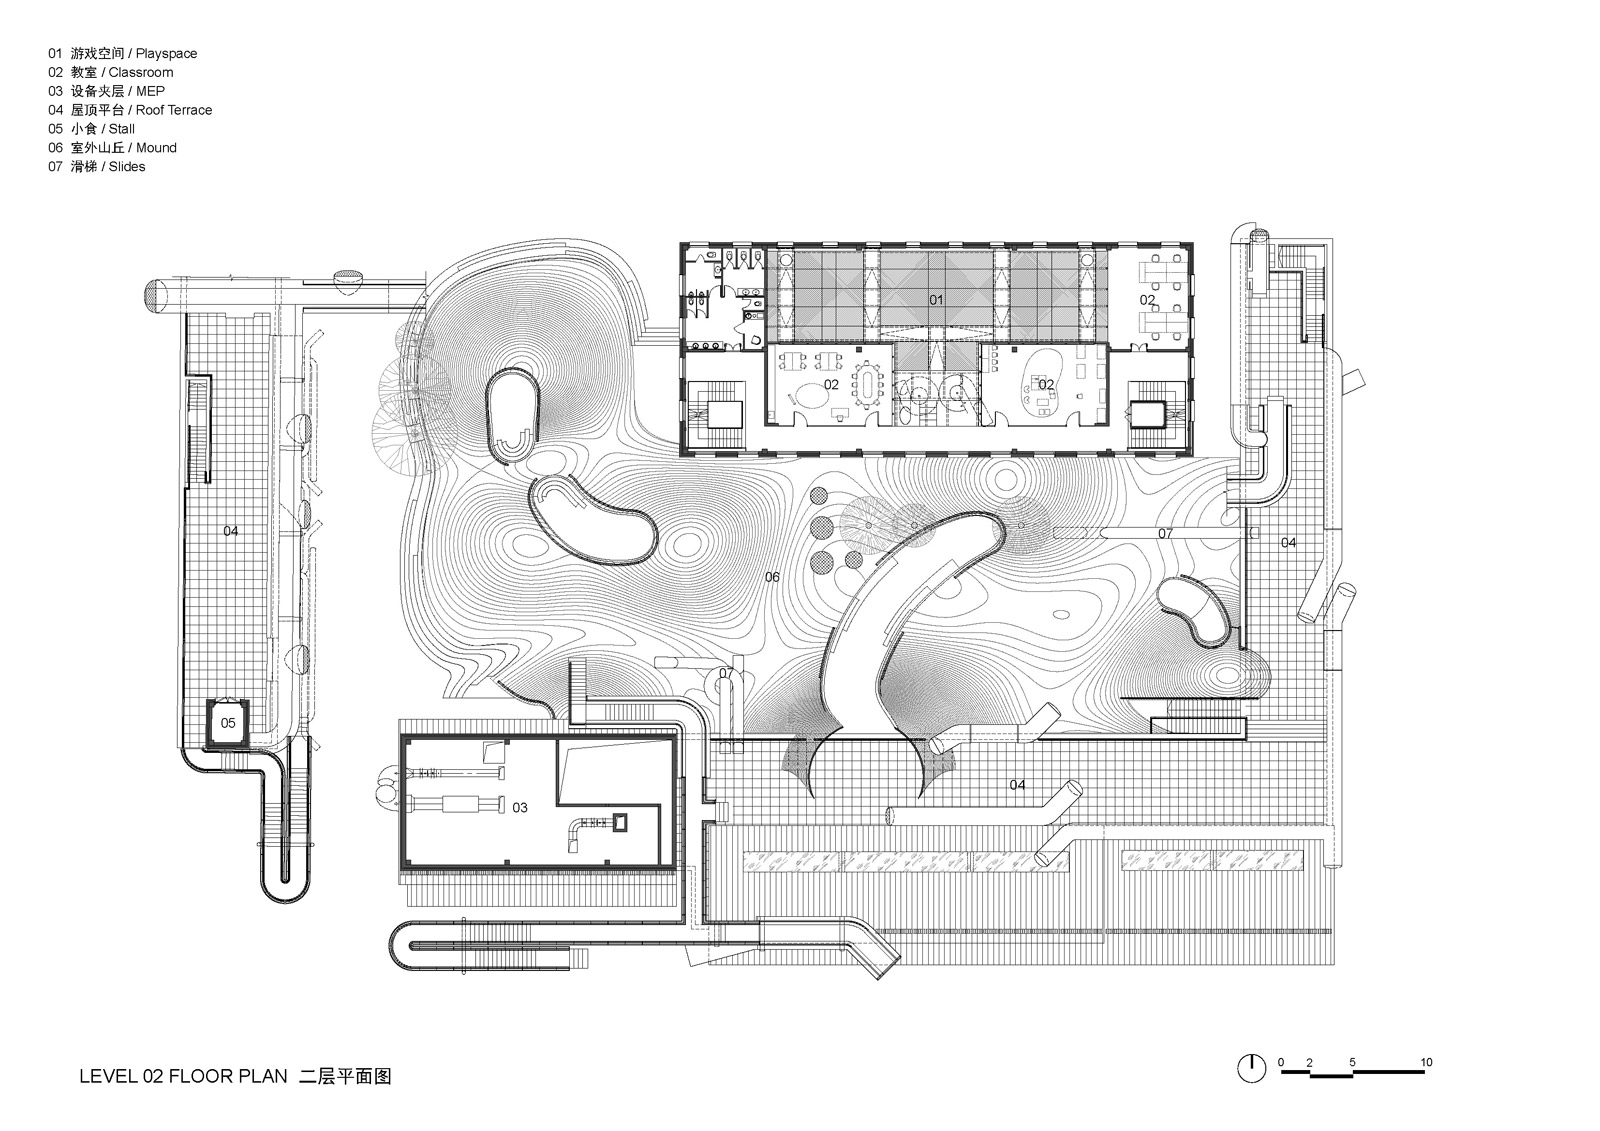 Image of 20220908 WAA ThePlayscape Plans 2 in The Playscape - Cosentino